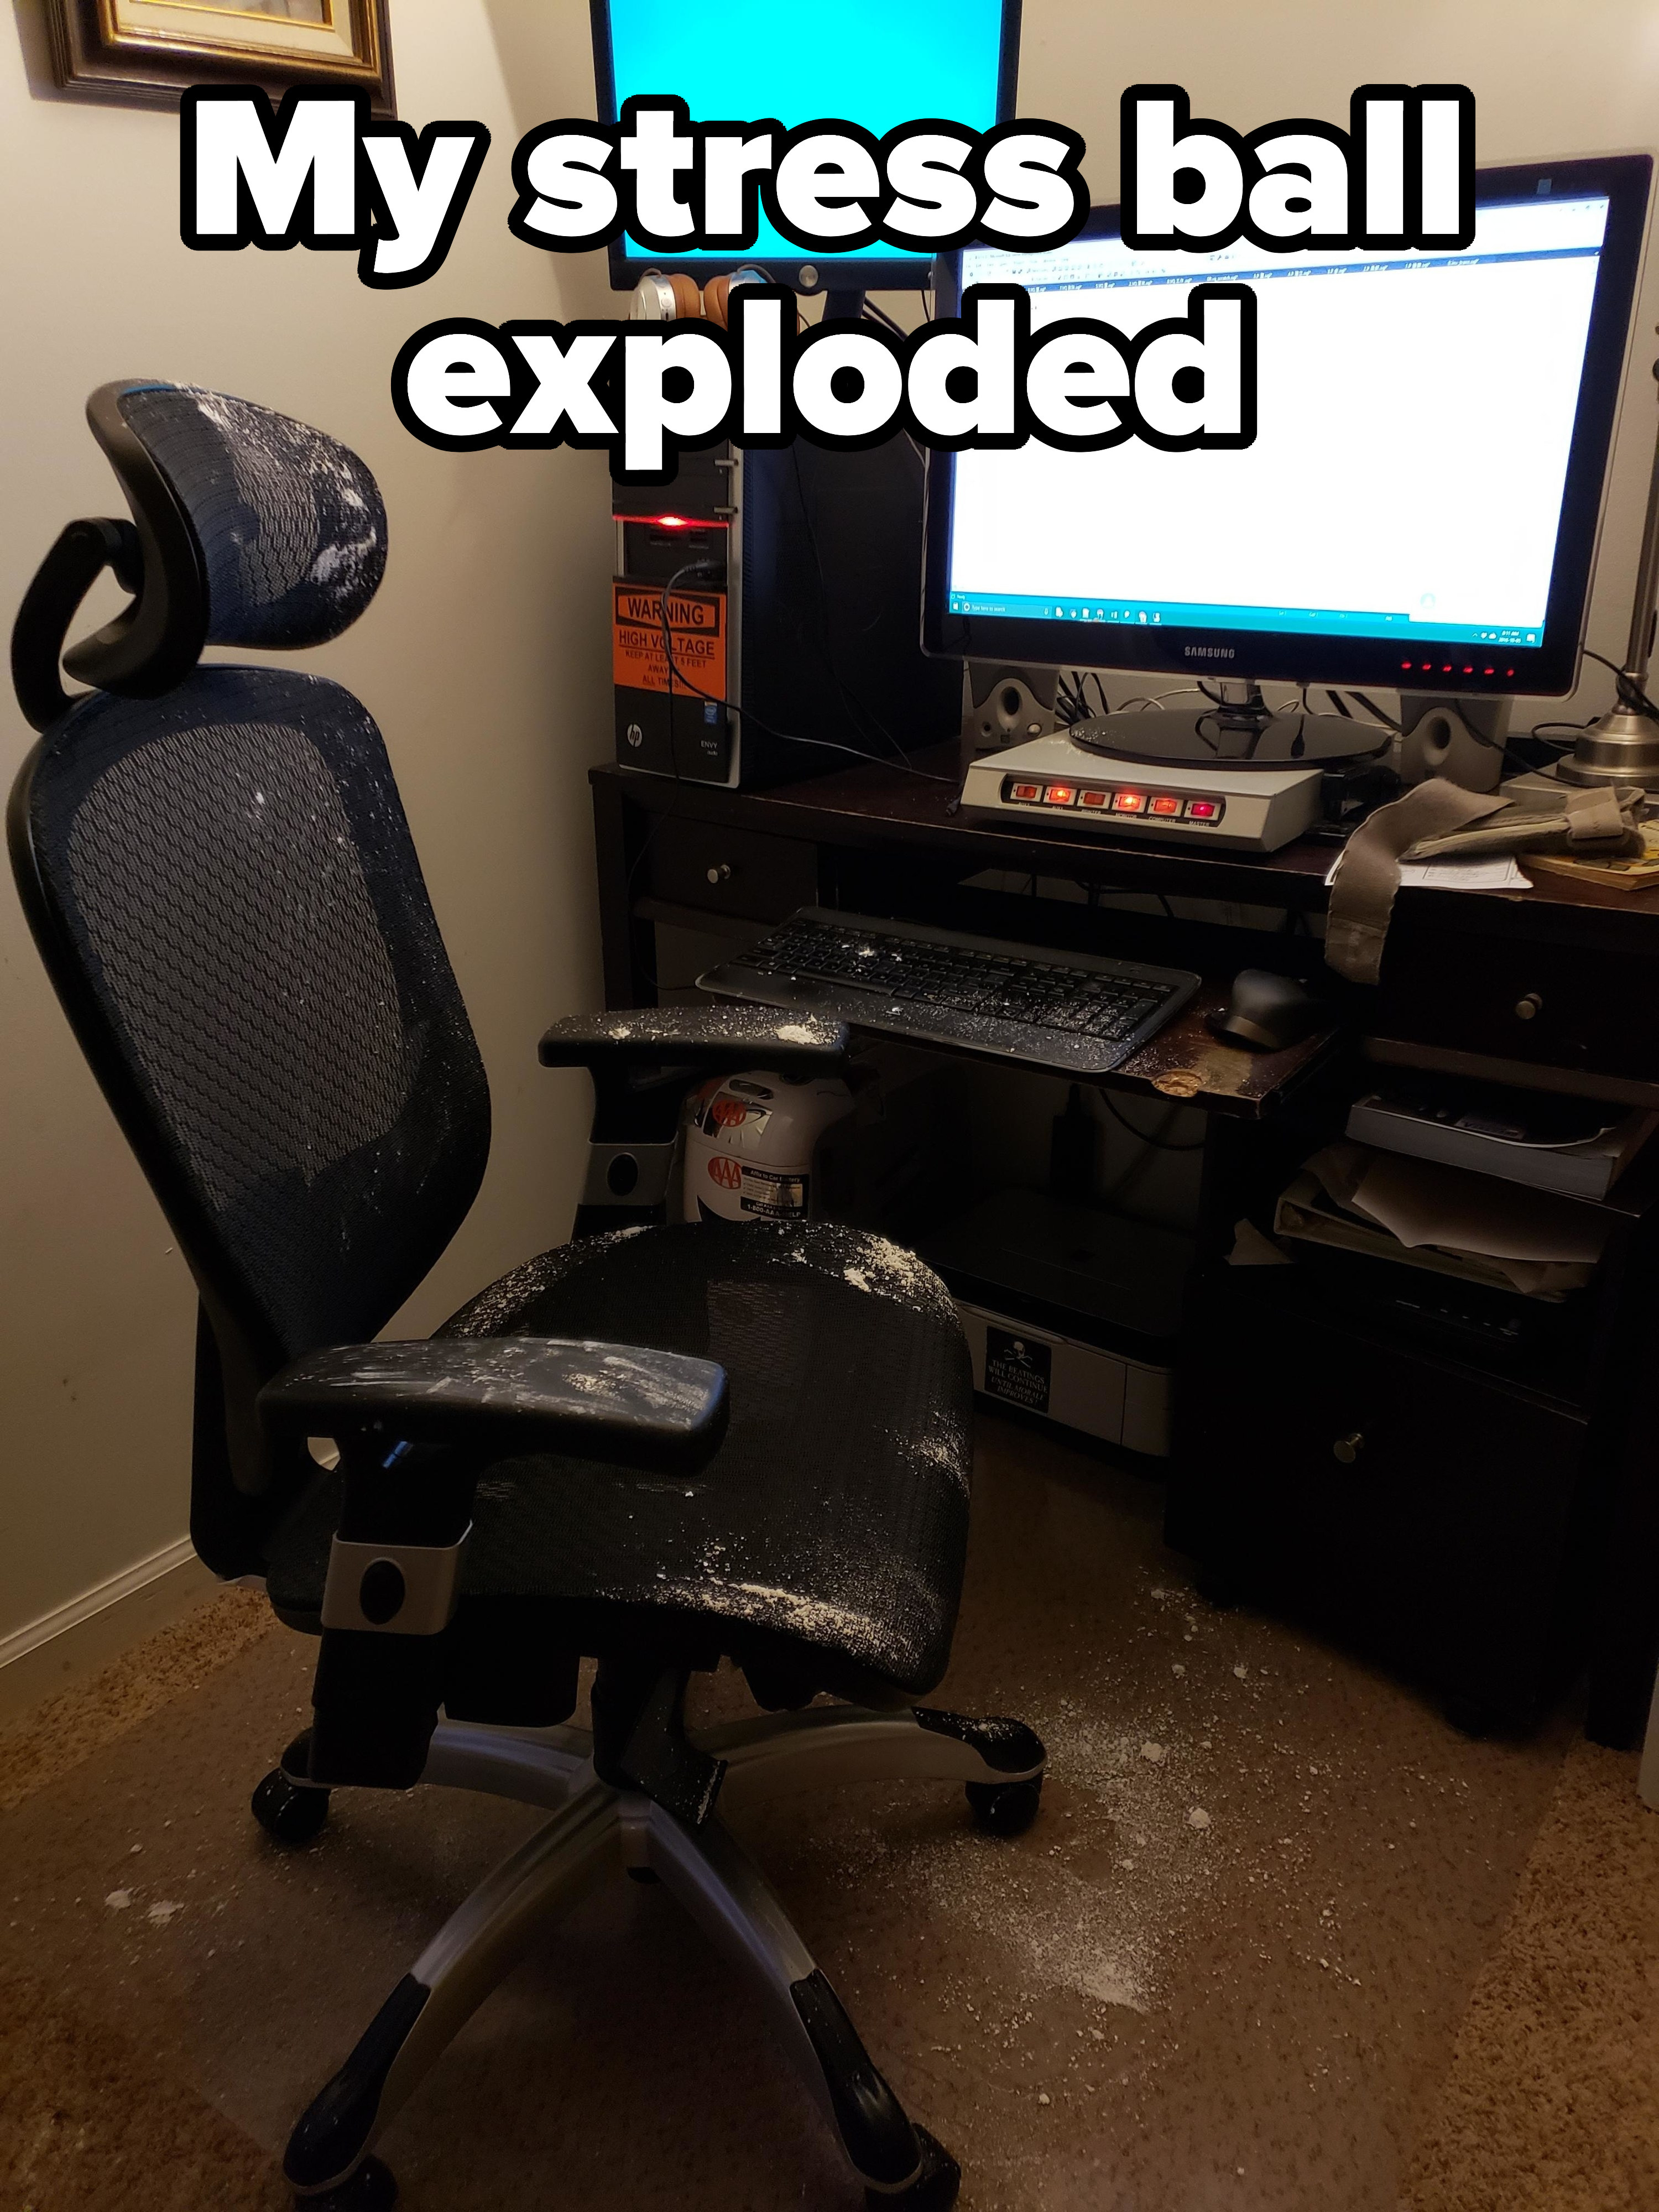 Powder all over a desk and chair